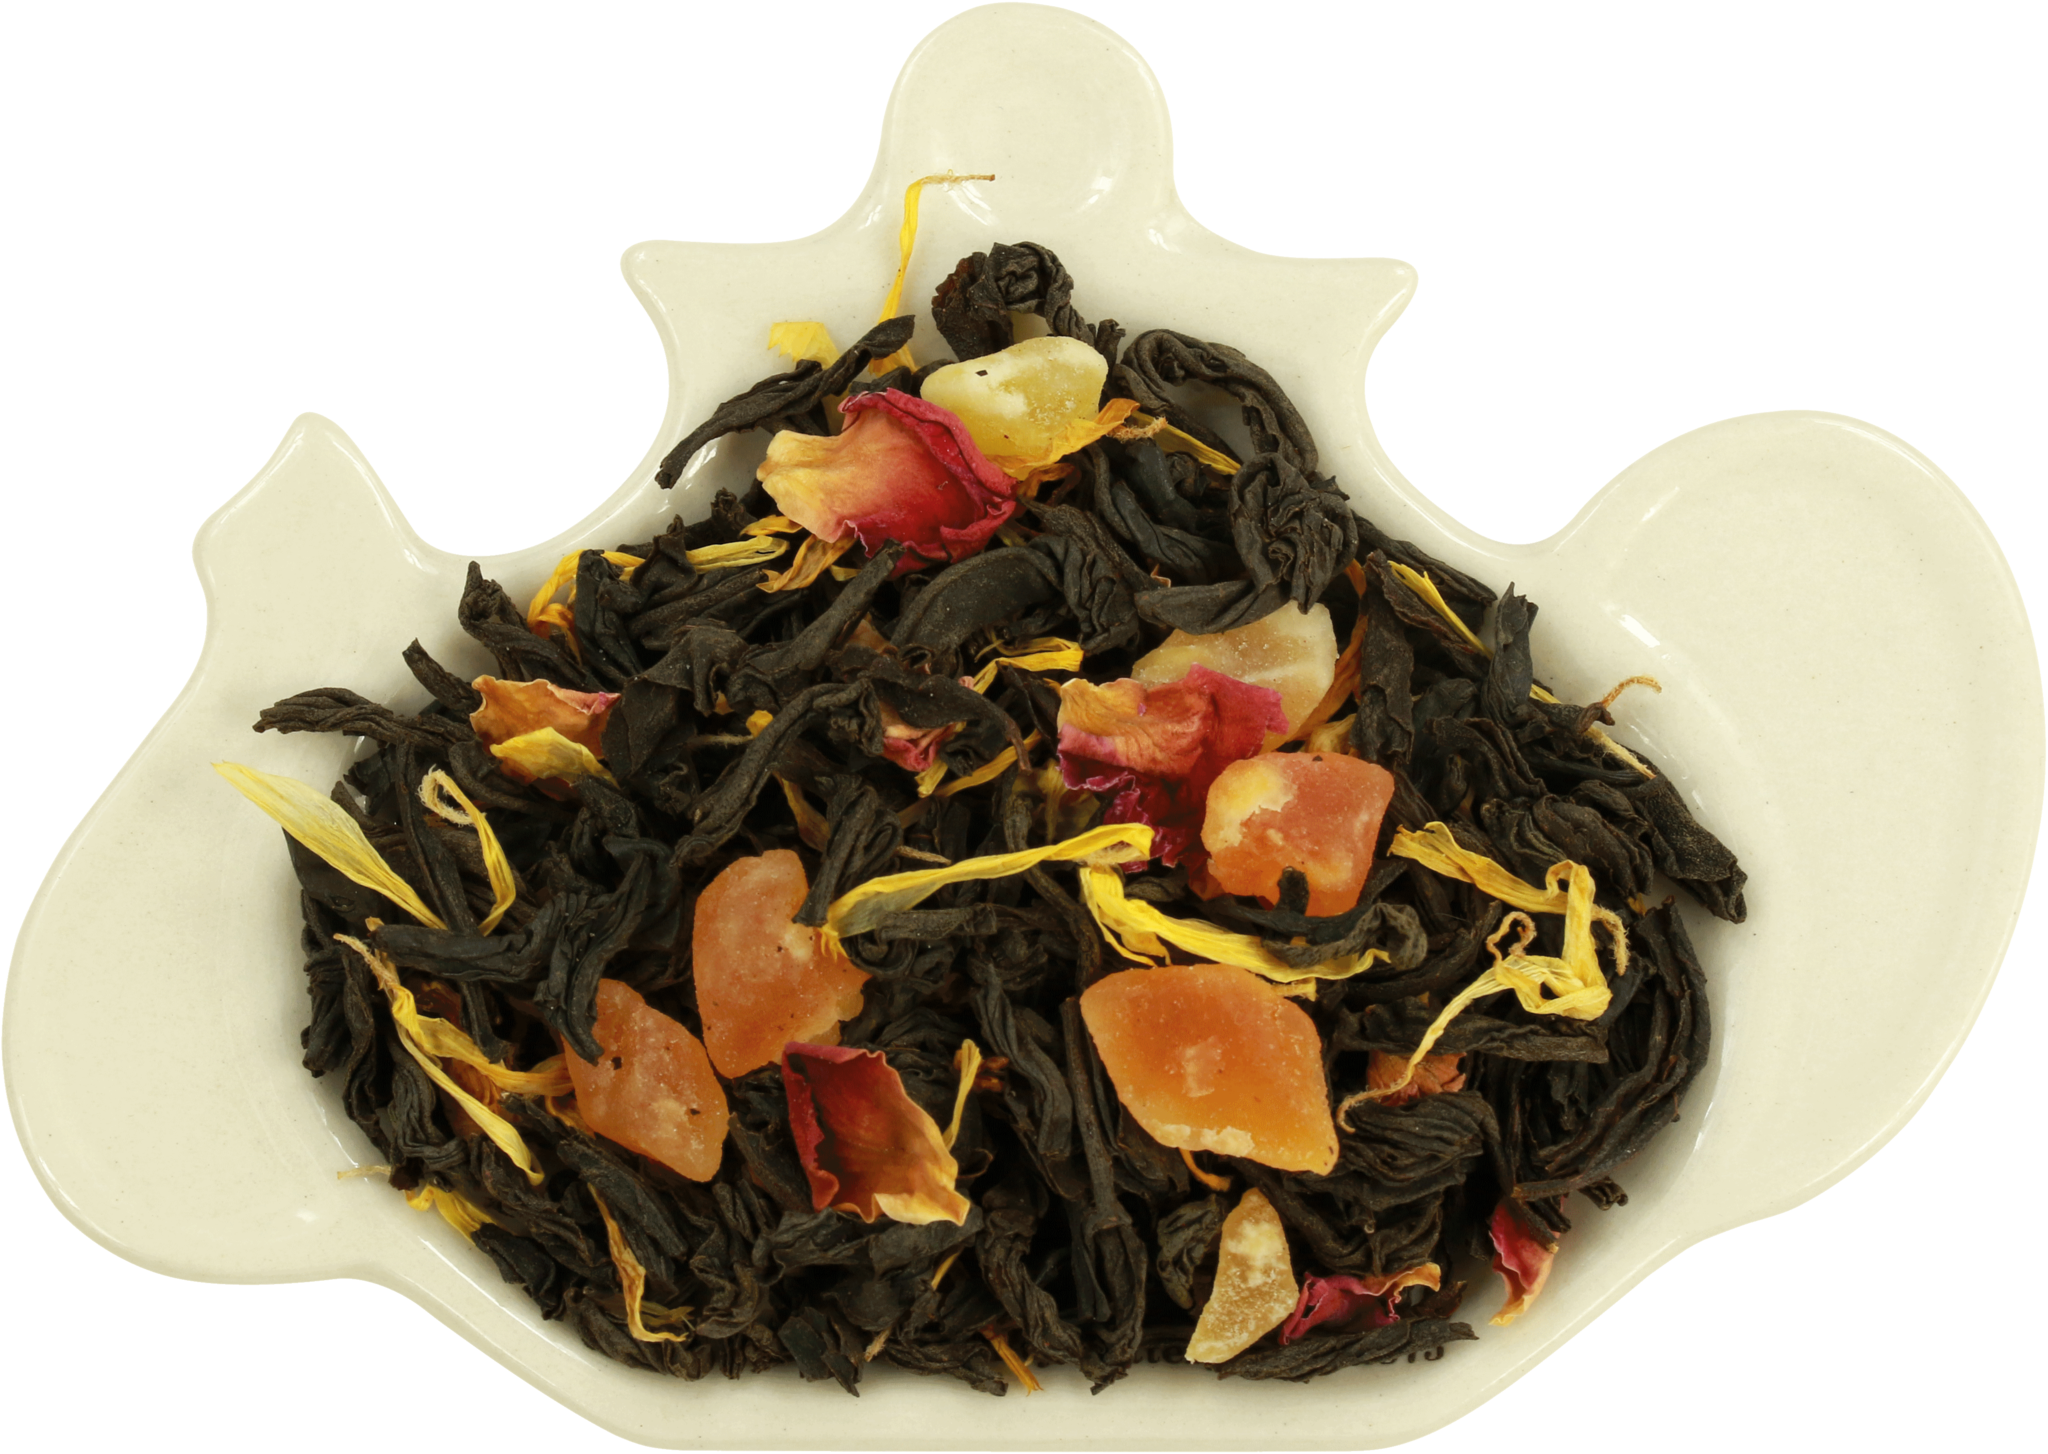 A Bowl Of Black Tea With Orange And Yellow Petals